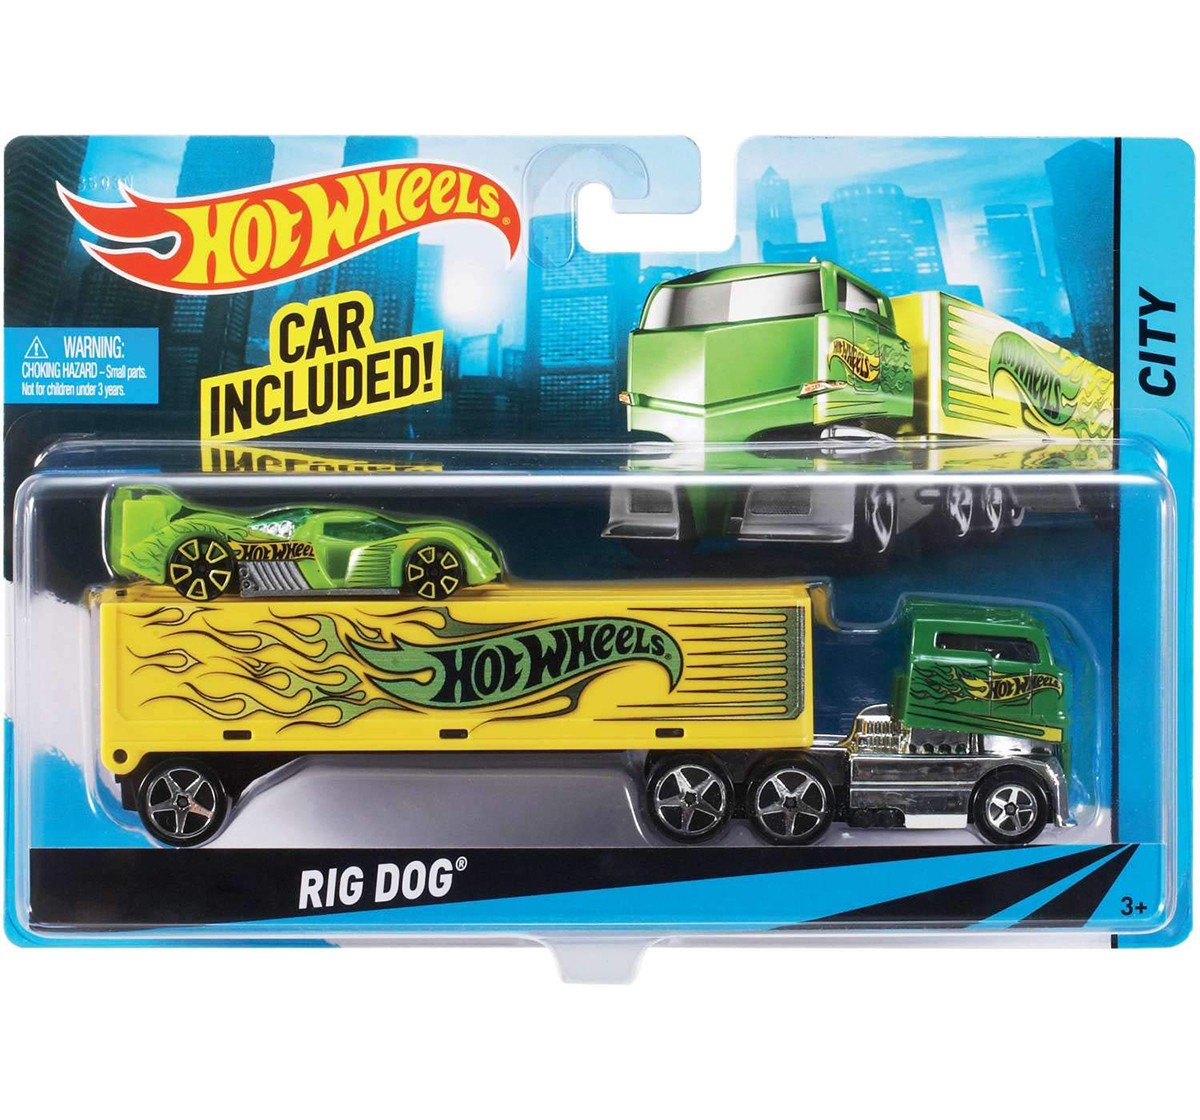 Hot Wheels Super Rigs Die Cast Cars Vehicles for Kids age 3Y+, Assorted